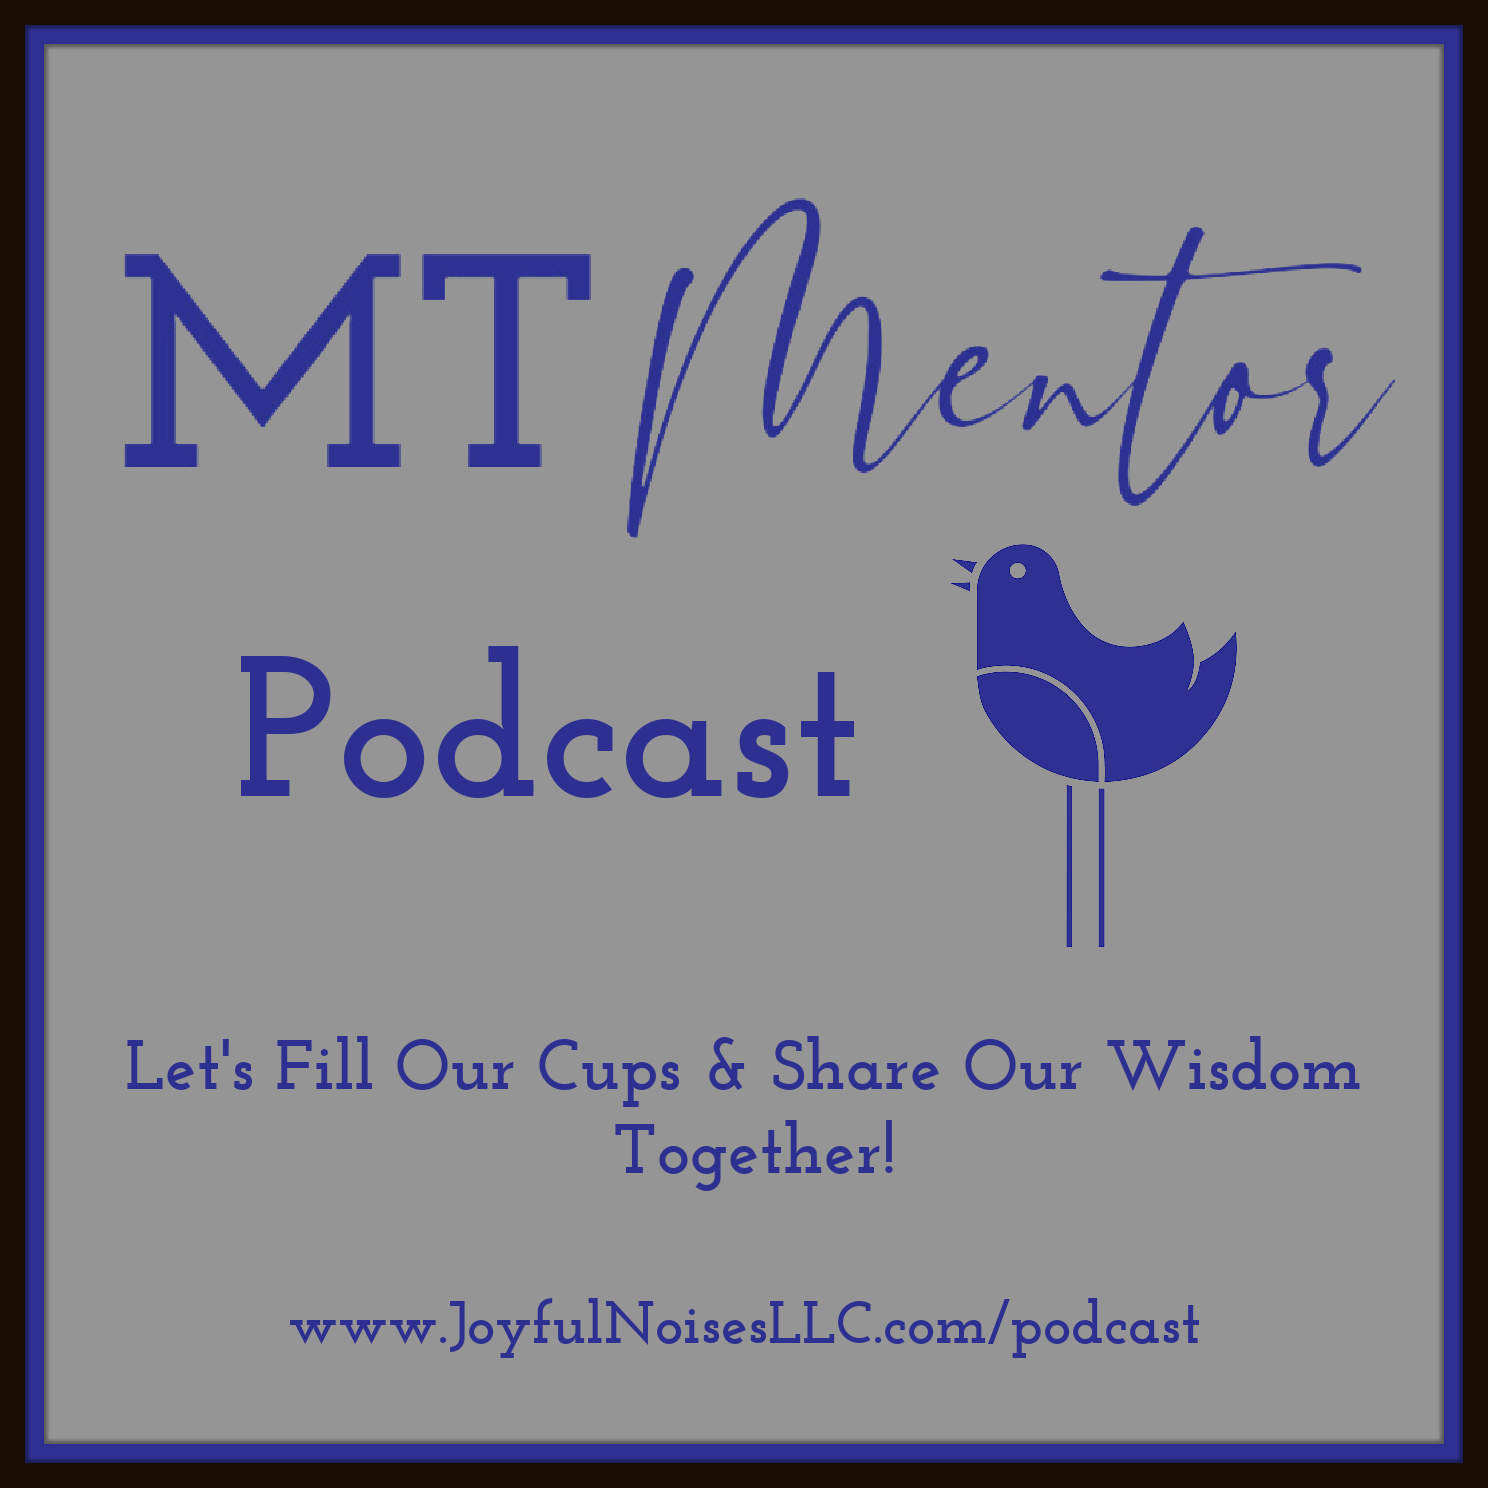 MT Mentor Podcast "Let's Fill Our Cups and Share Our Wisdom Together" with image of Joyful Noises bluebird